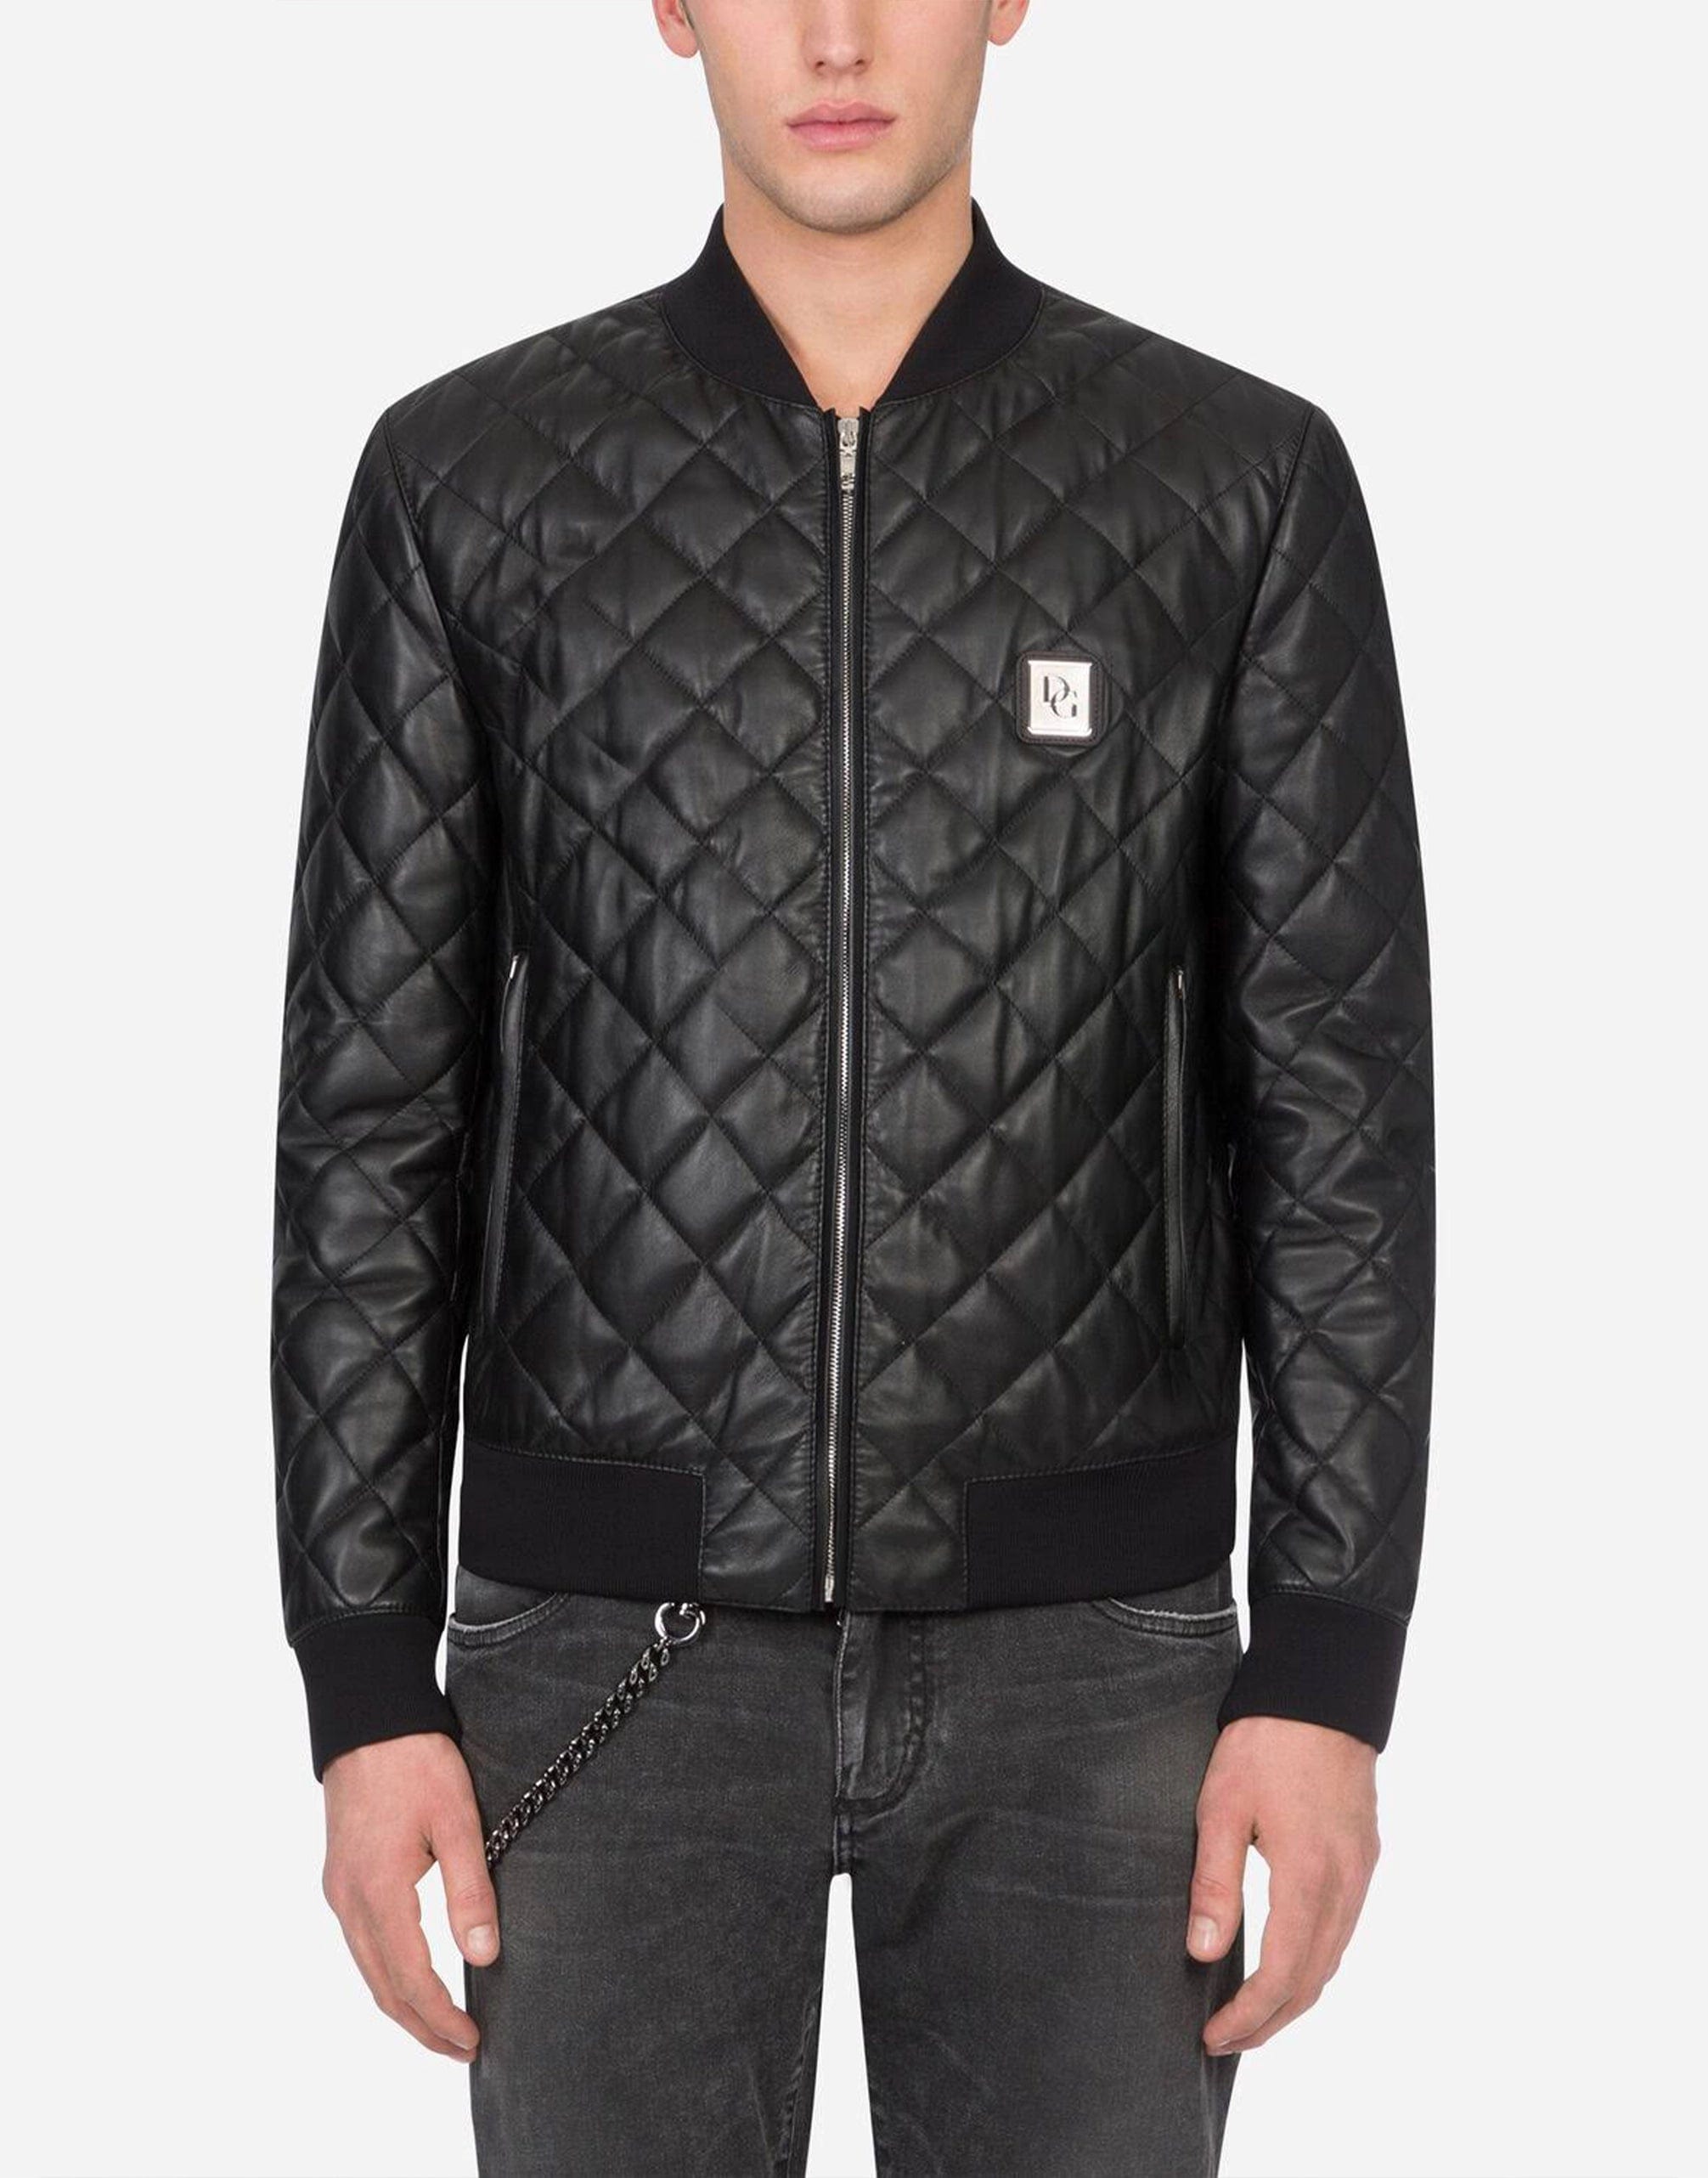 Dolce & Gabbana Quilted Leather Jacket With Branded Plate